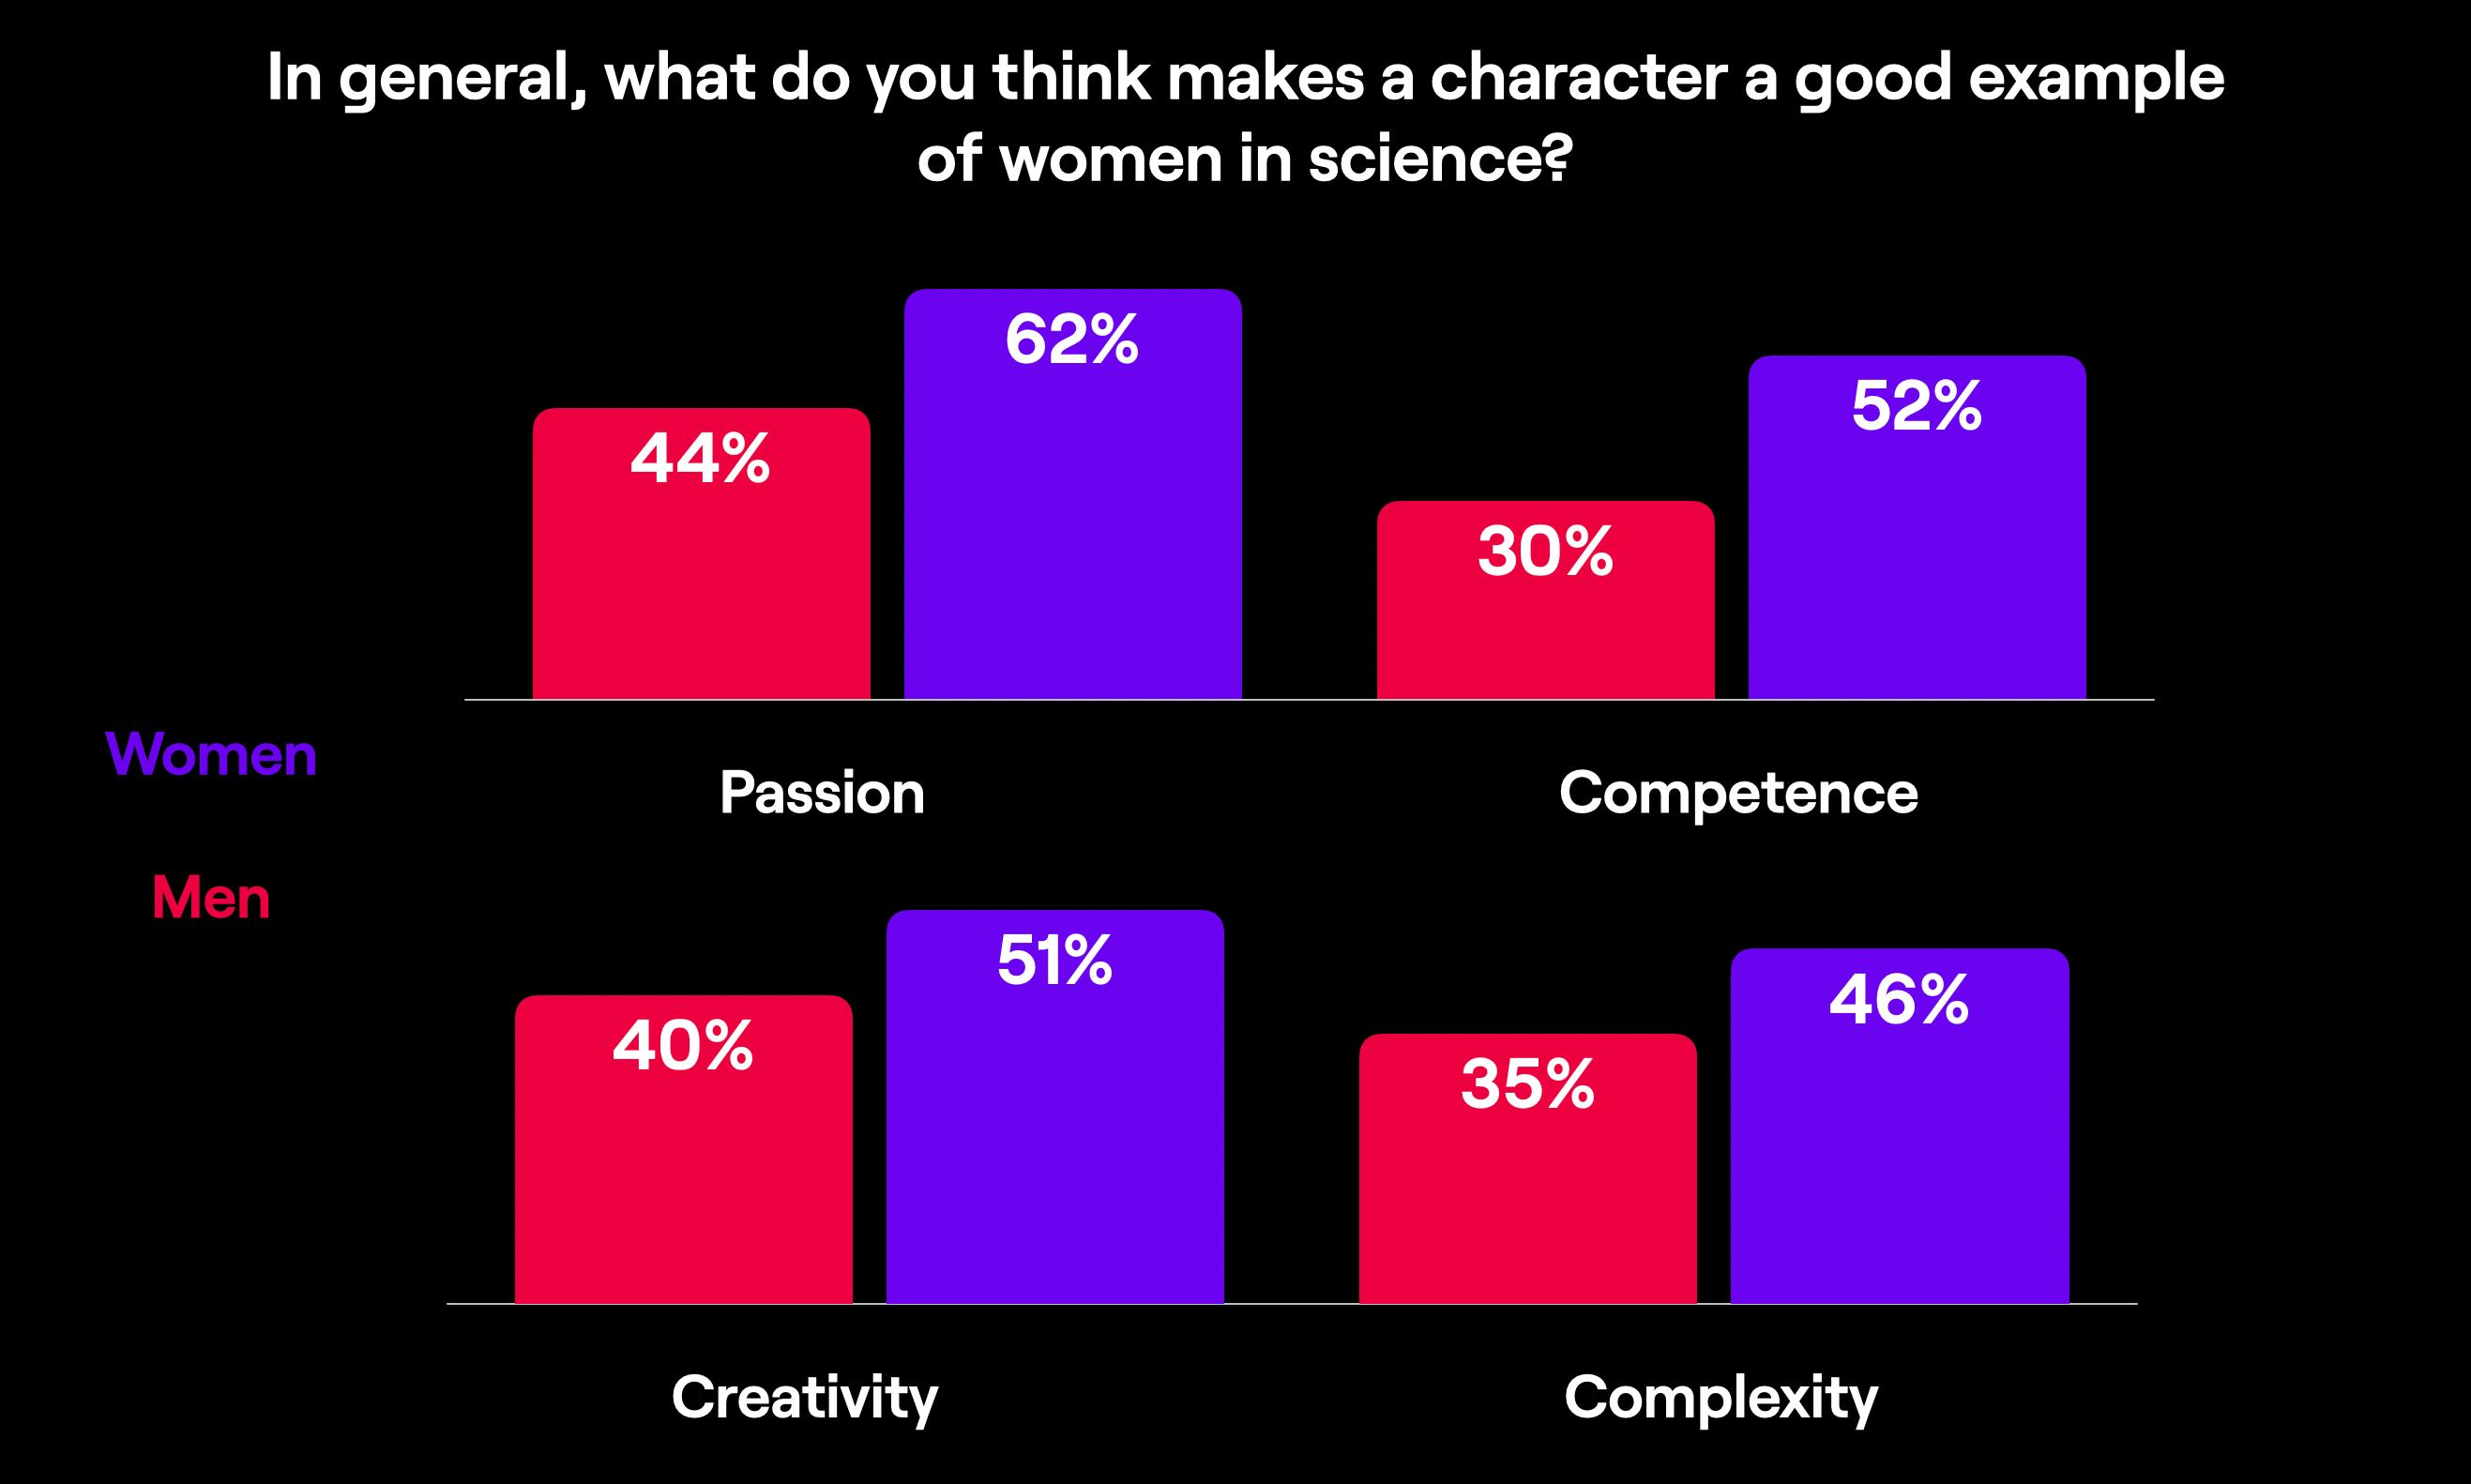 In general, what do you think makes a character a good example of women in science?

Women see more Passion, competence, creativity, and complexity.